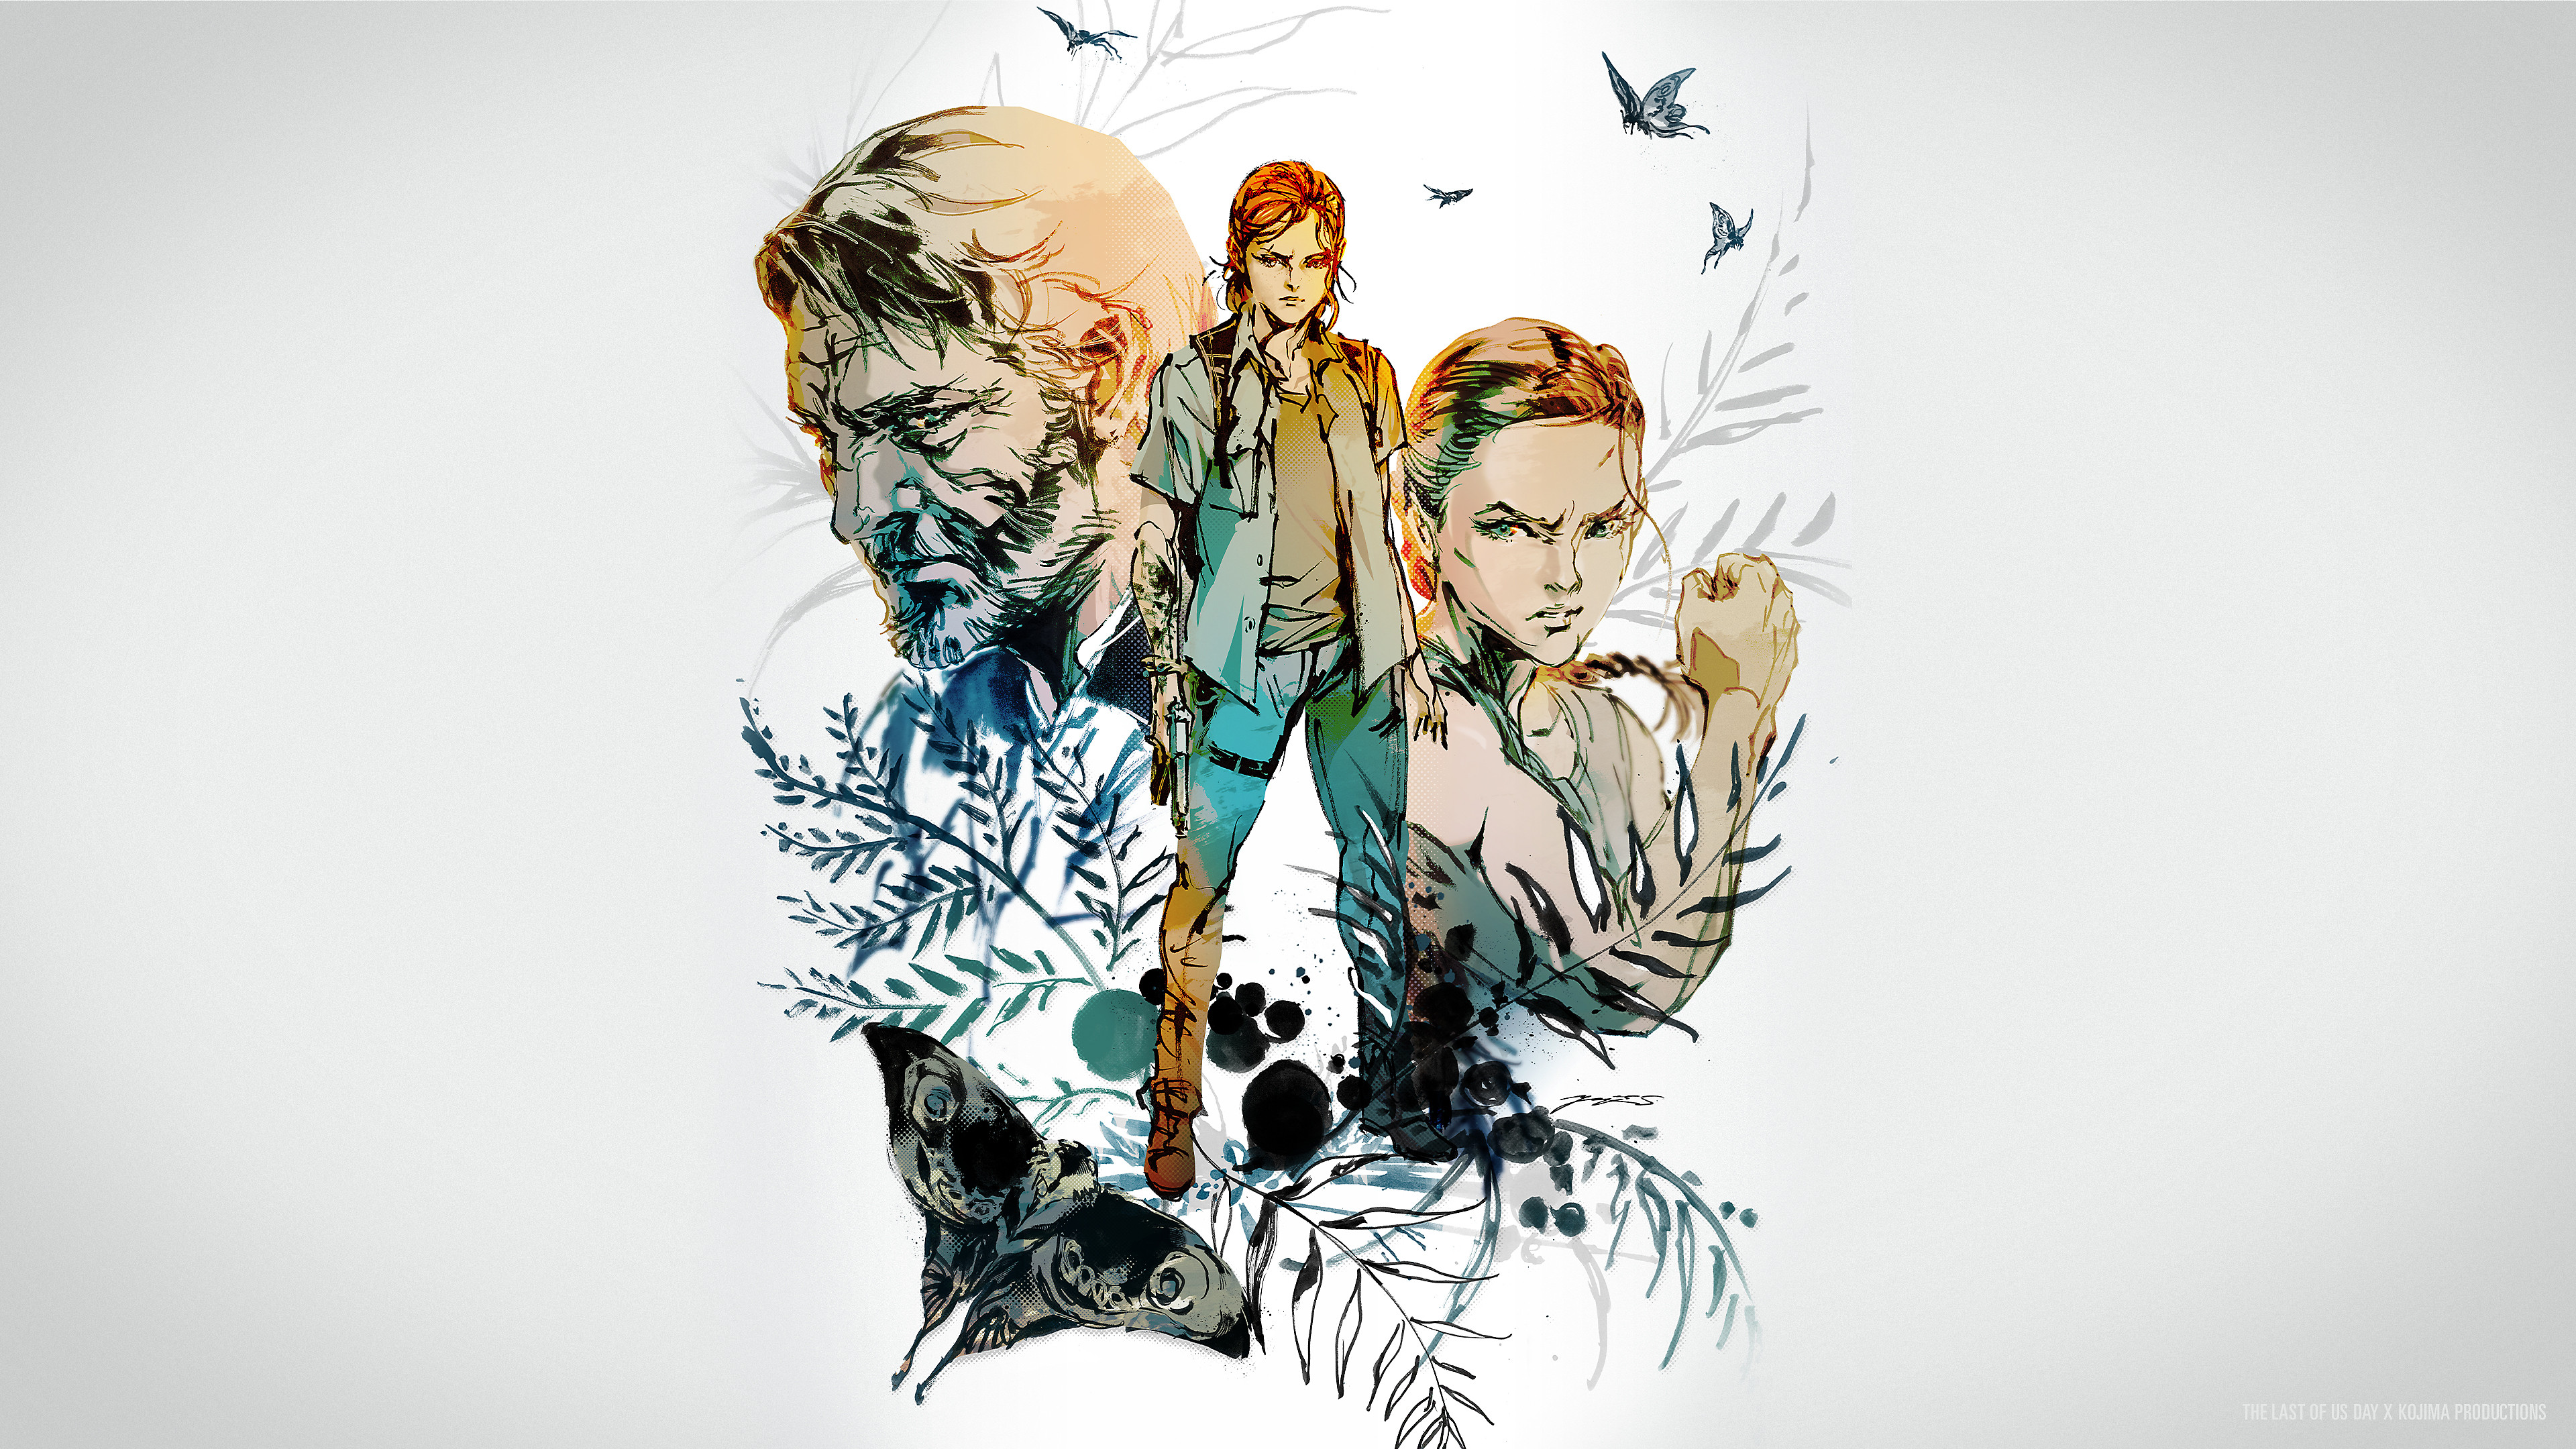 Check out these stunning The Last of Us wallpaper created